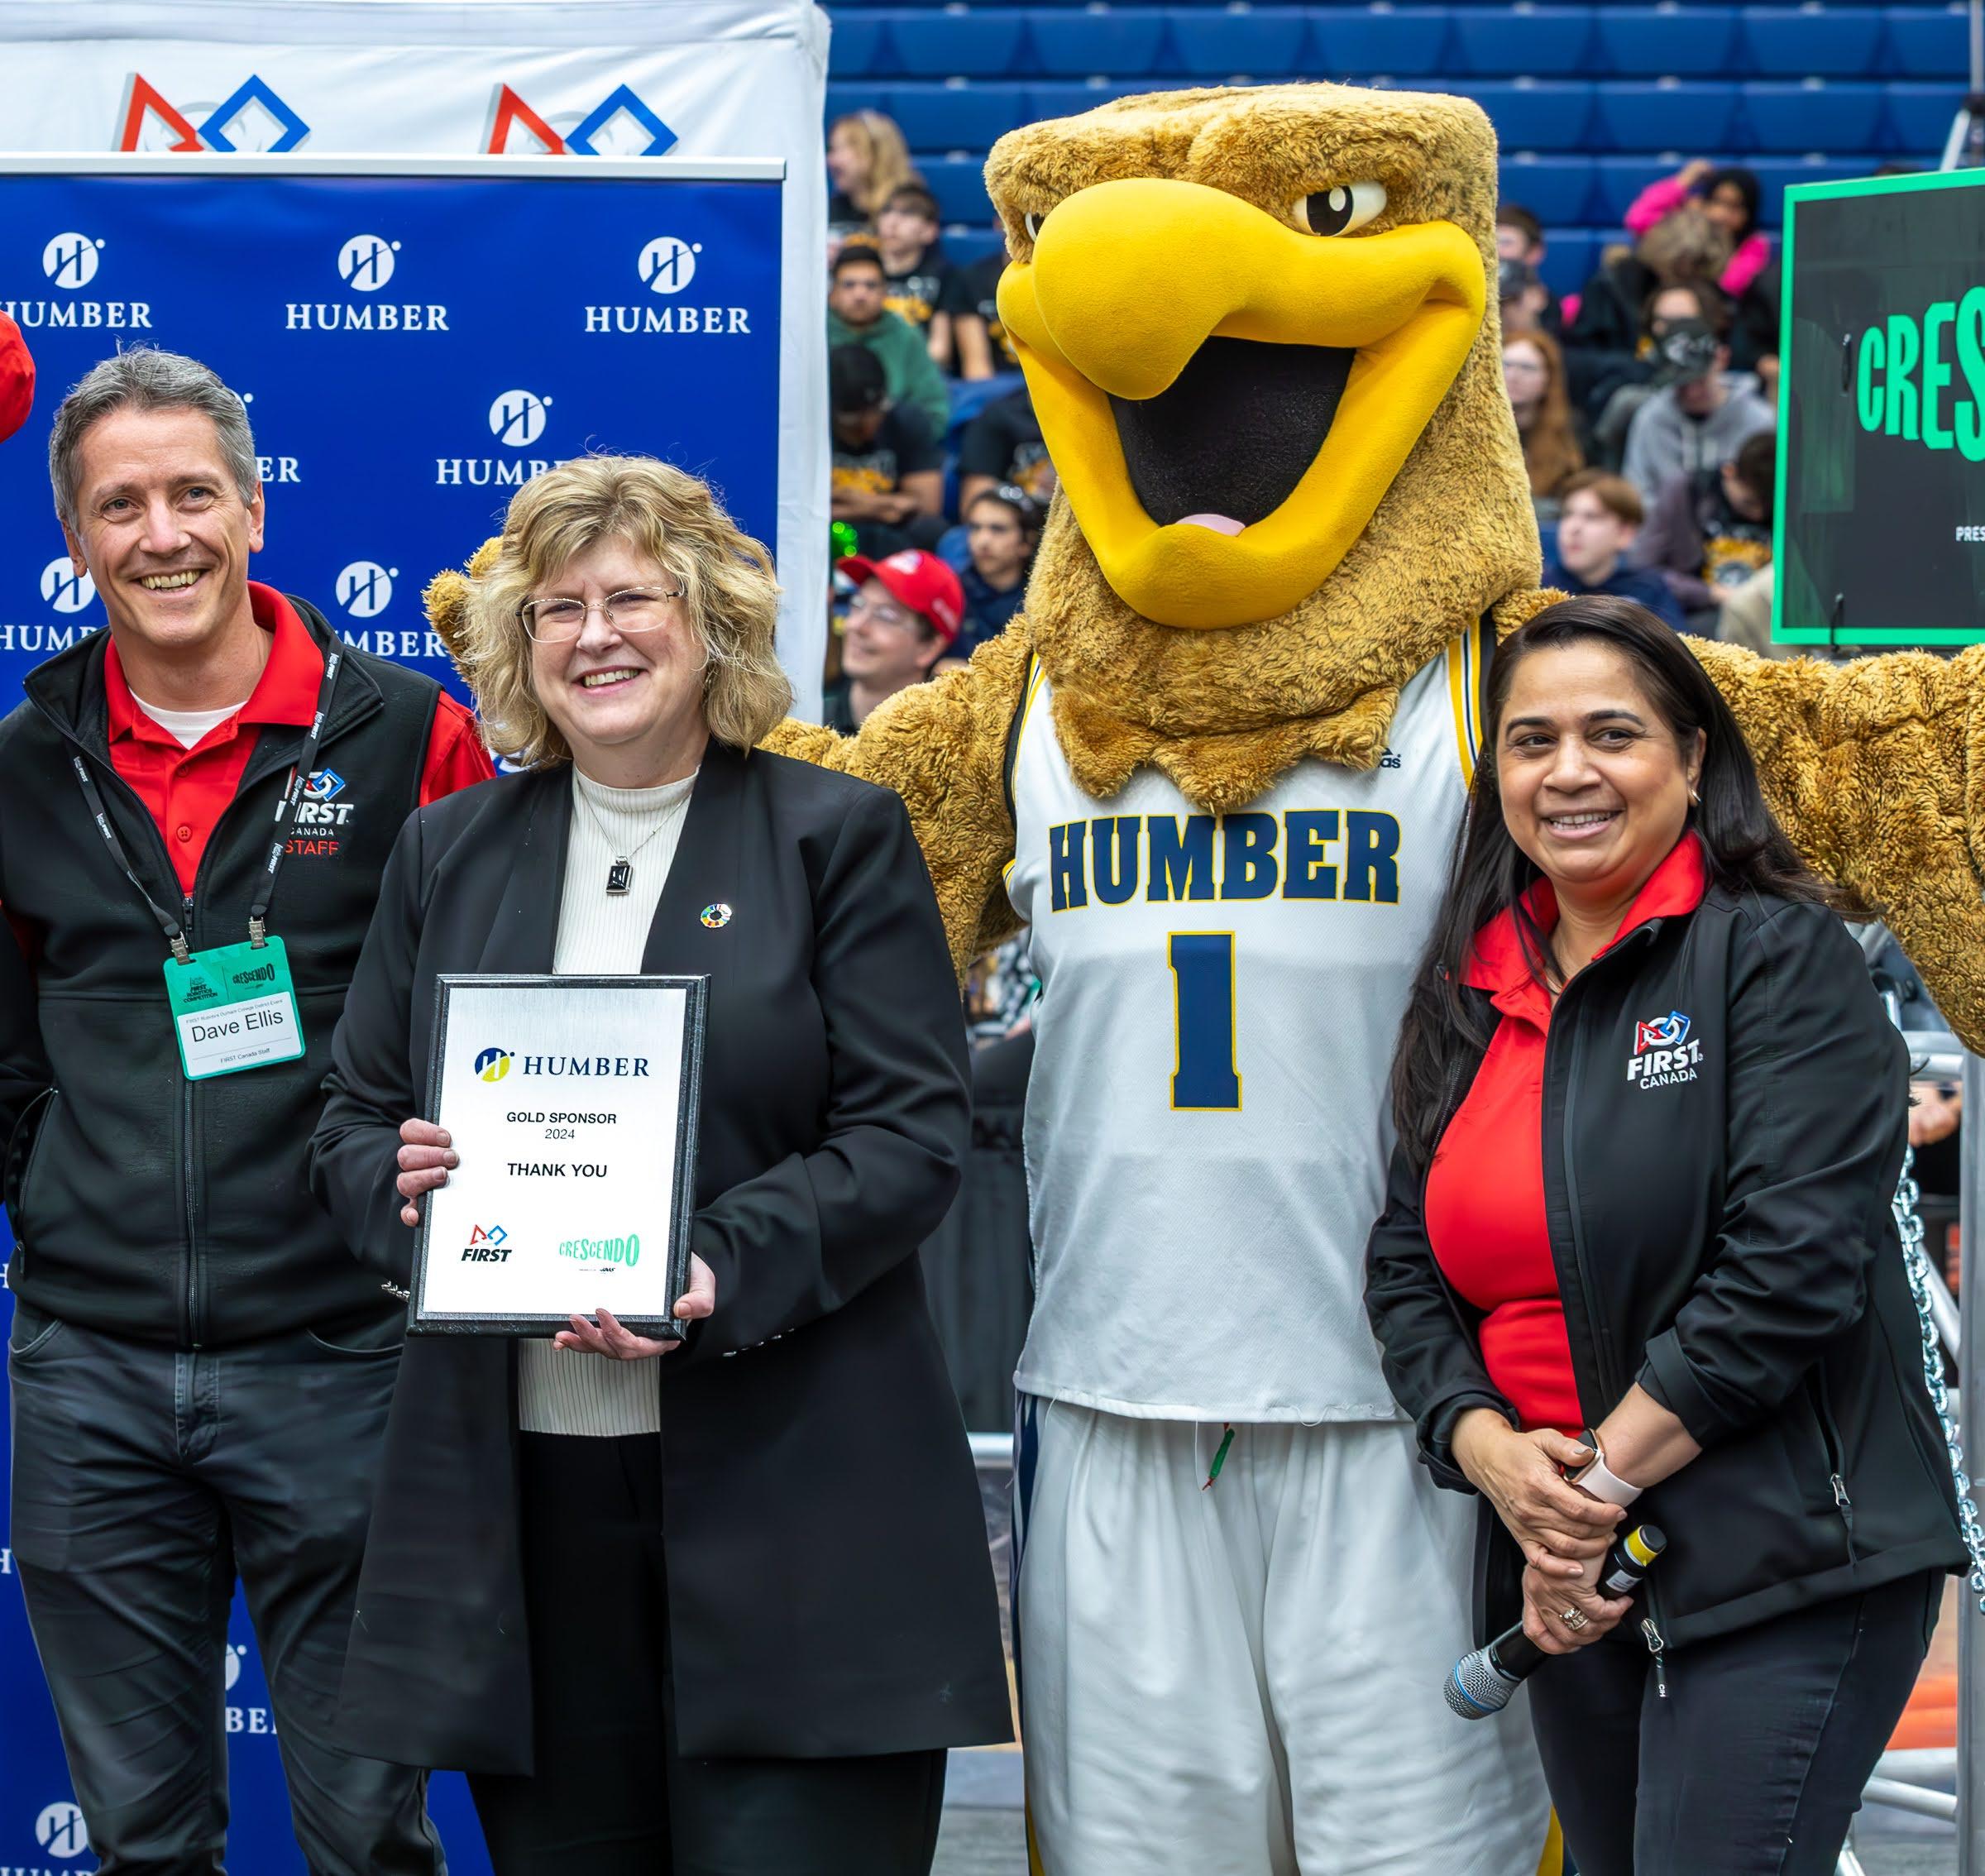 Three smiling people stand together along with the Humber Hawk mascot. One of them is holding up a plaque.